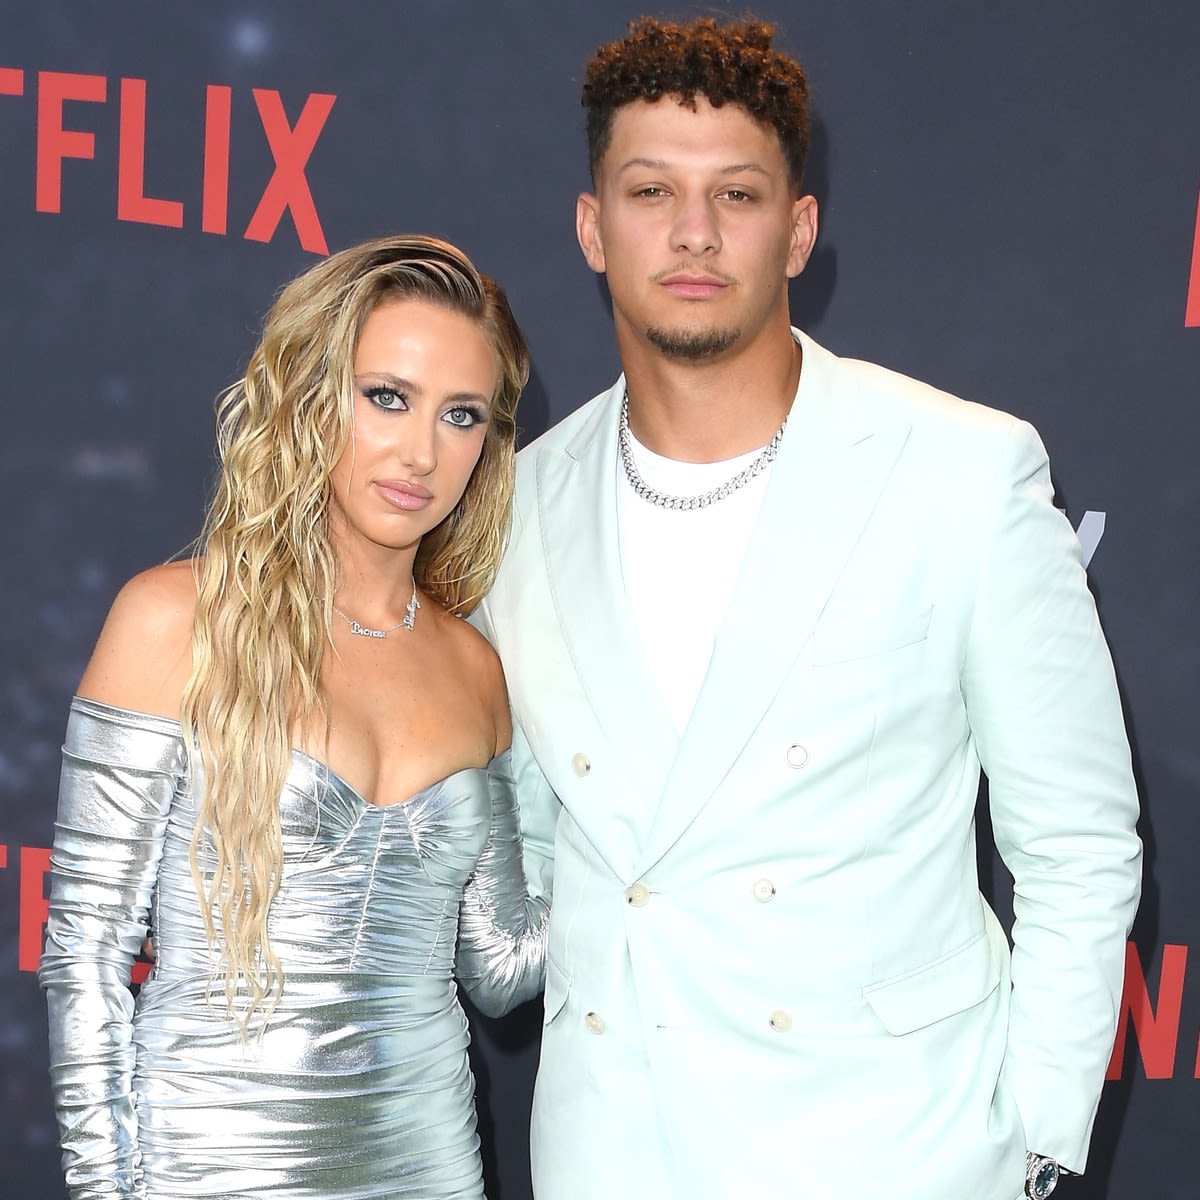 Brittany Mahomes Shares “Sad” Update on Her & Patrick’s Family Pets